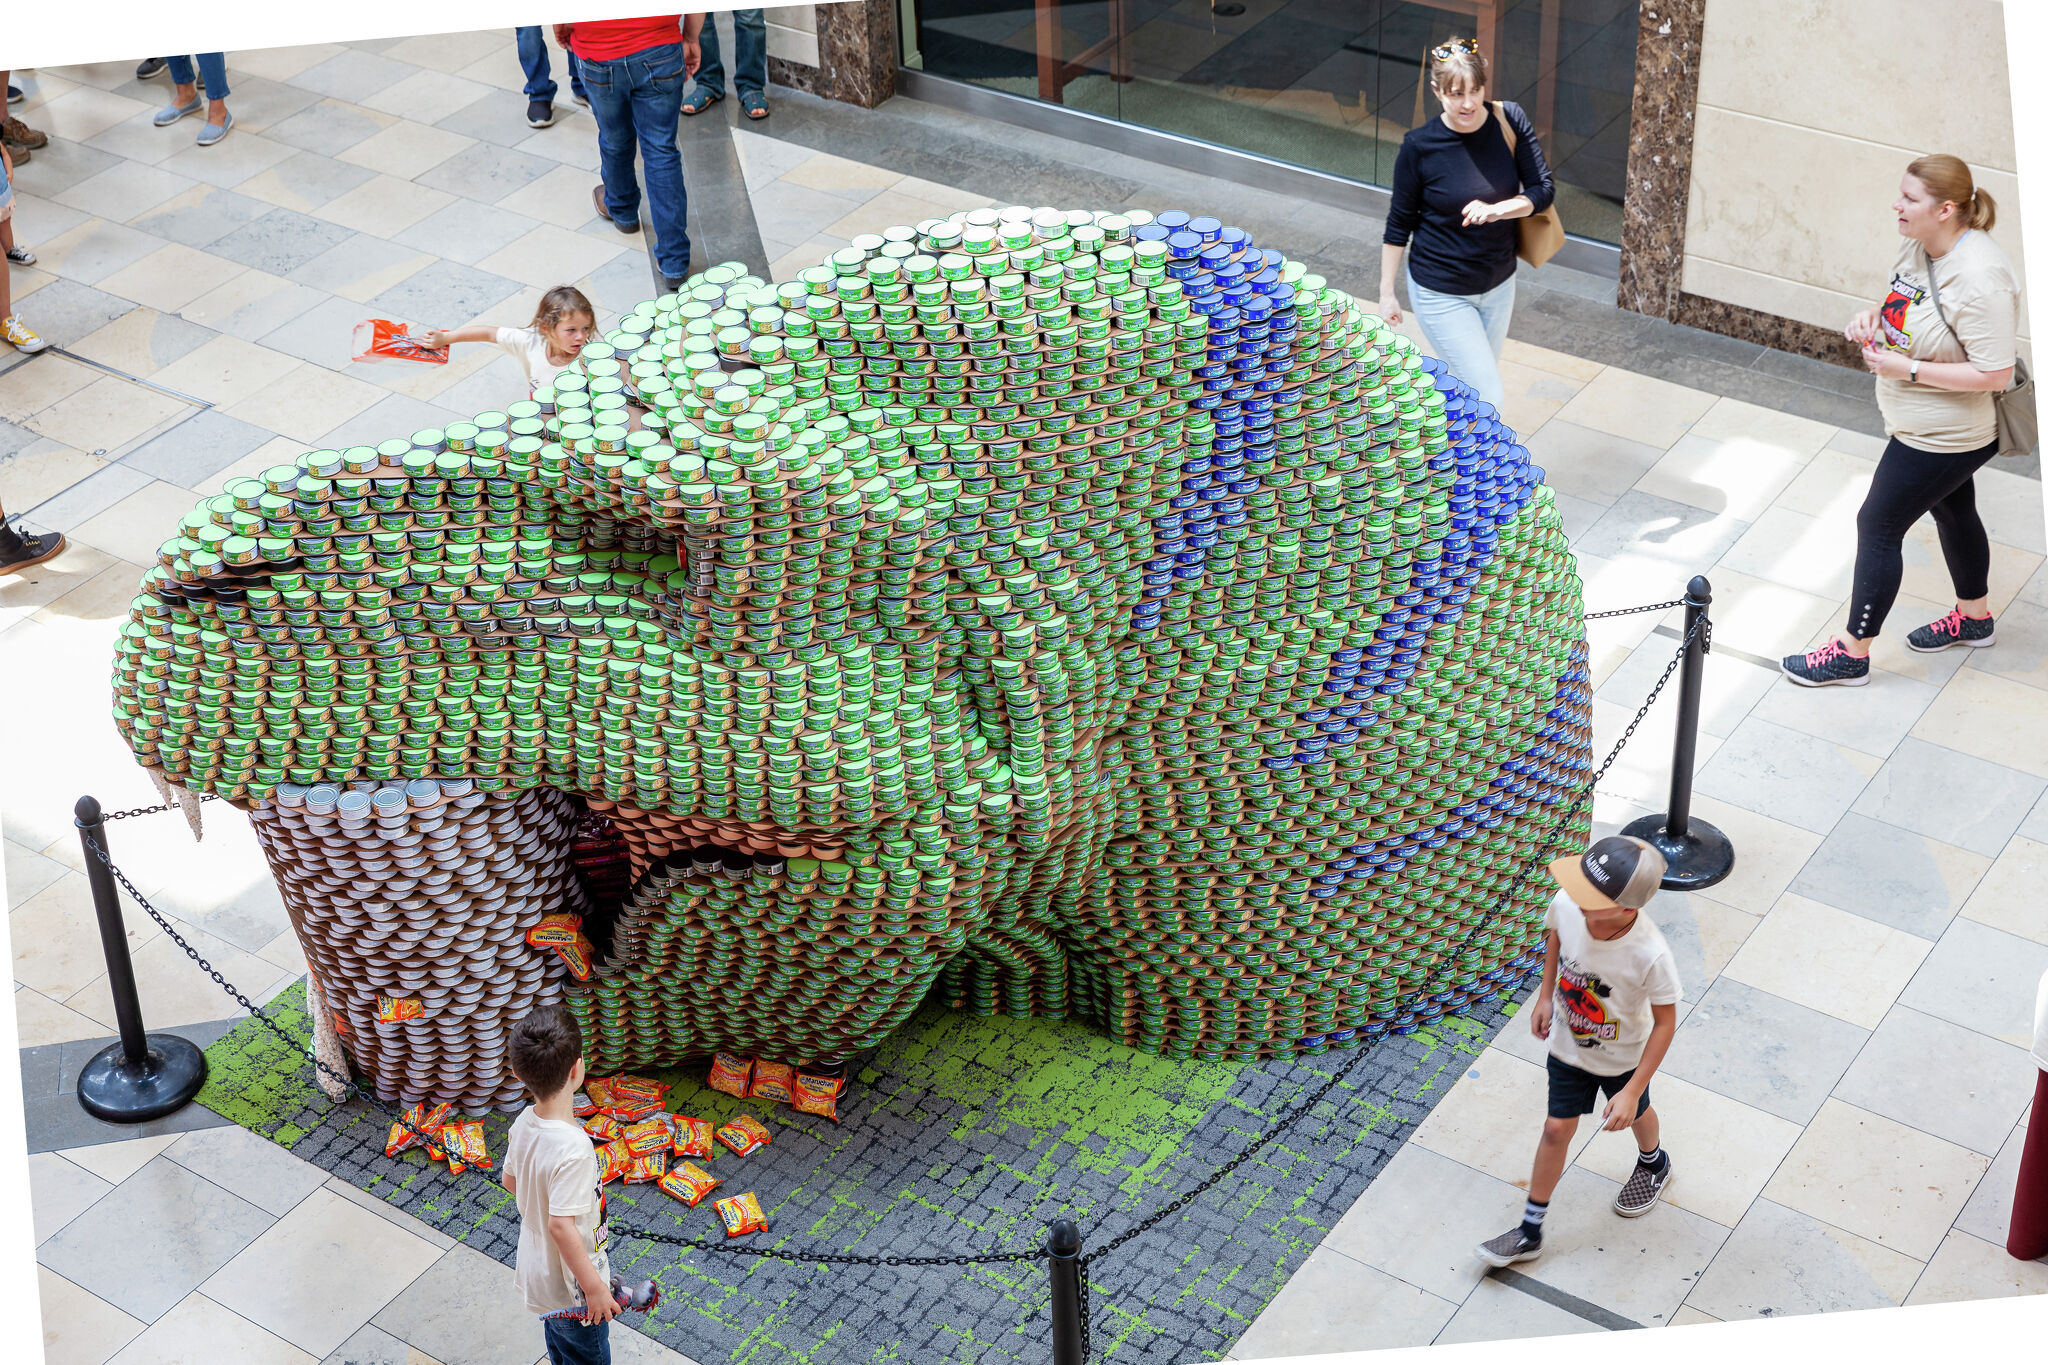 Canstruction 2021 at North Park Center